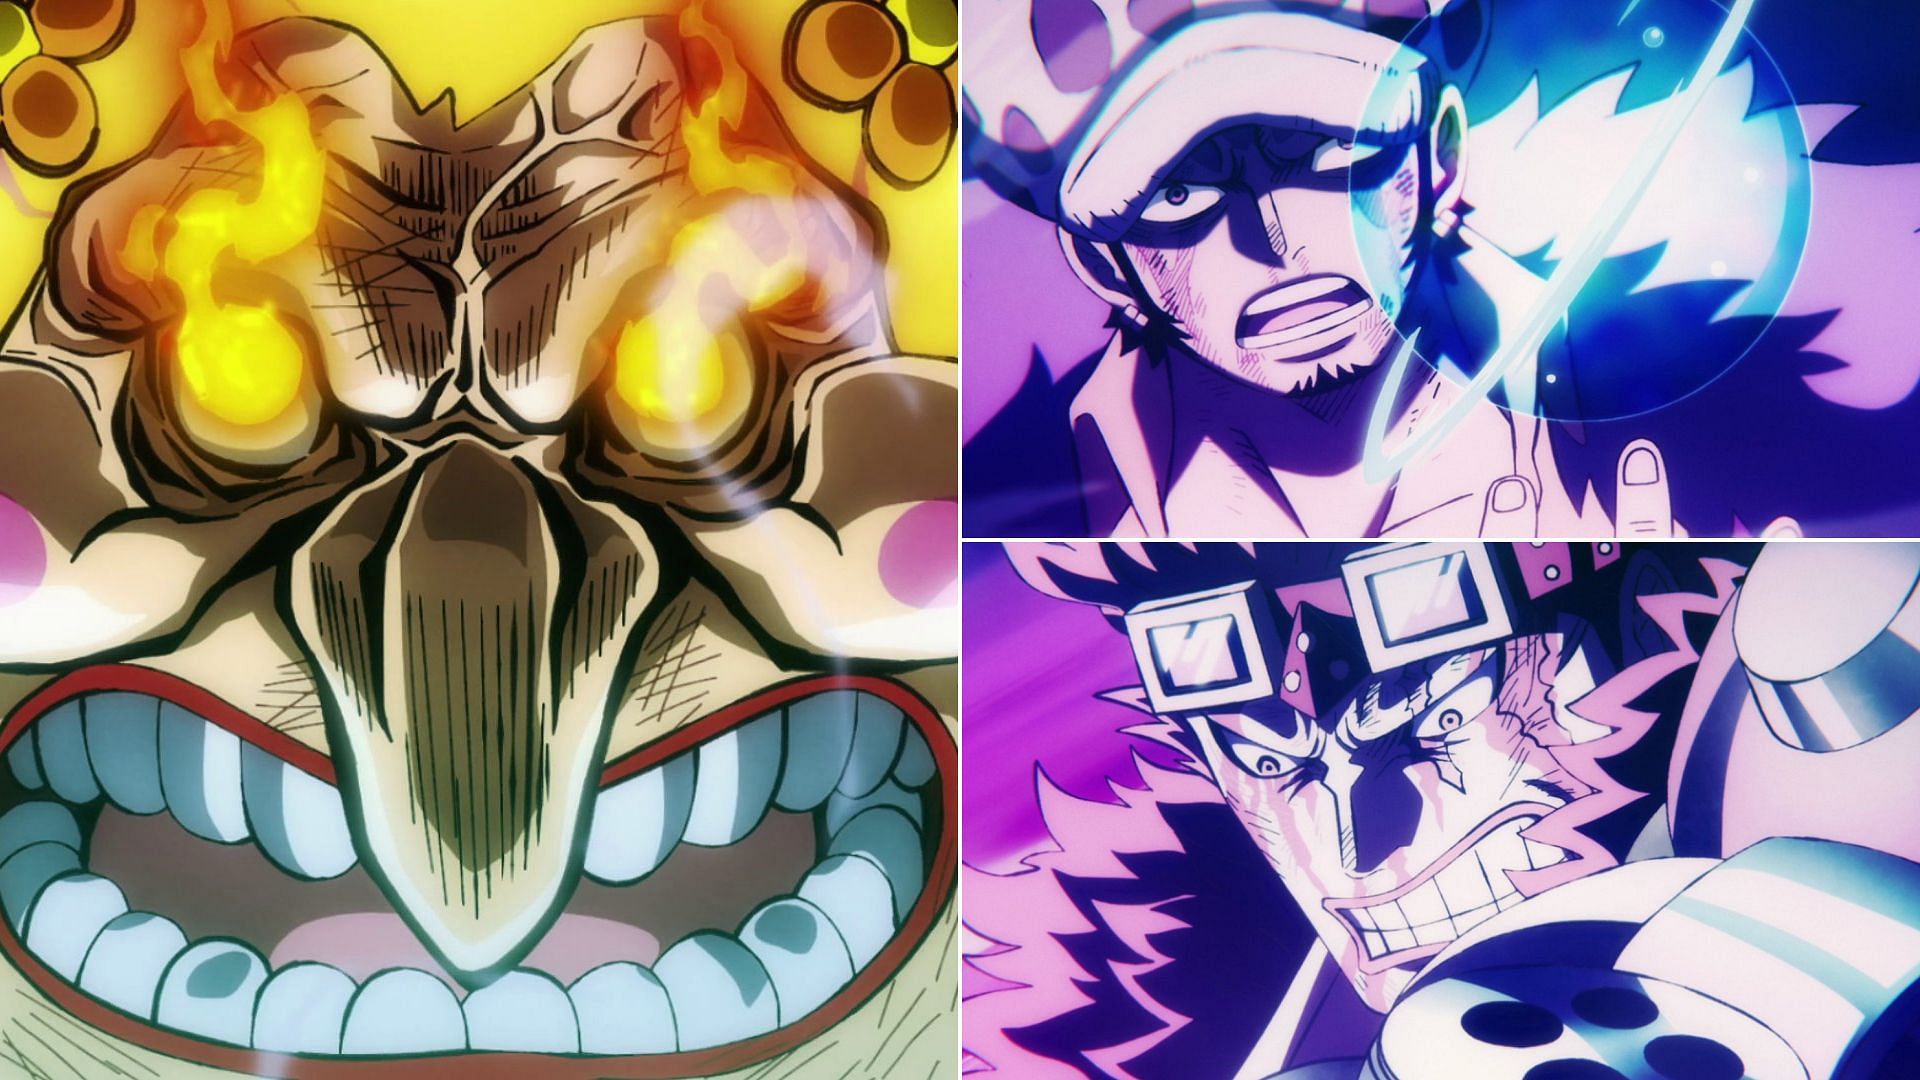 Big Mom vs Law and Kid as seen in One Piece (Image via Toei Animation, One Piece)